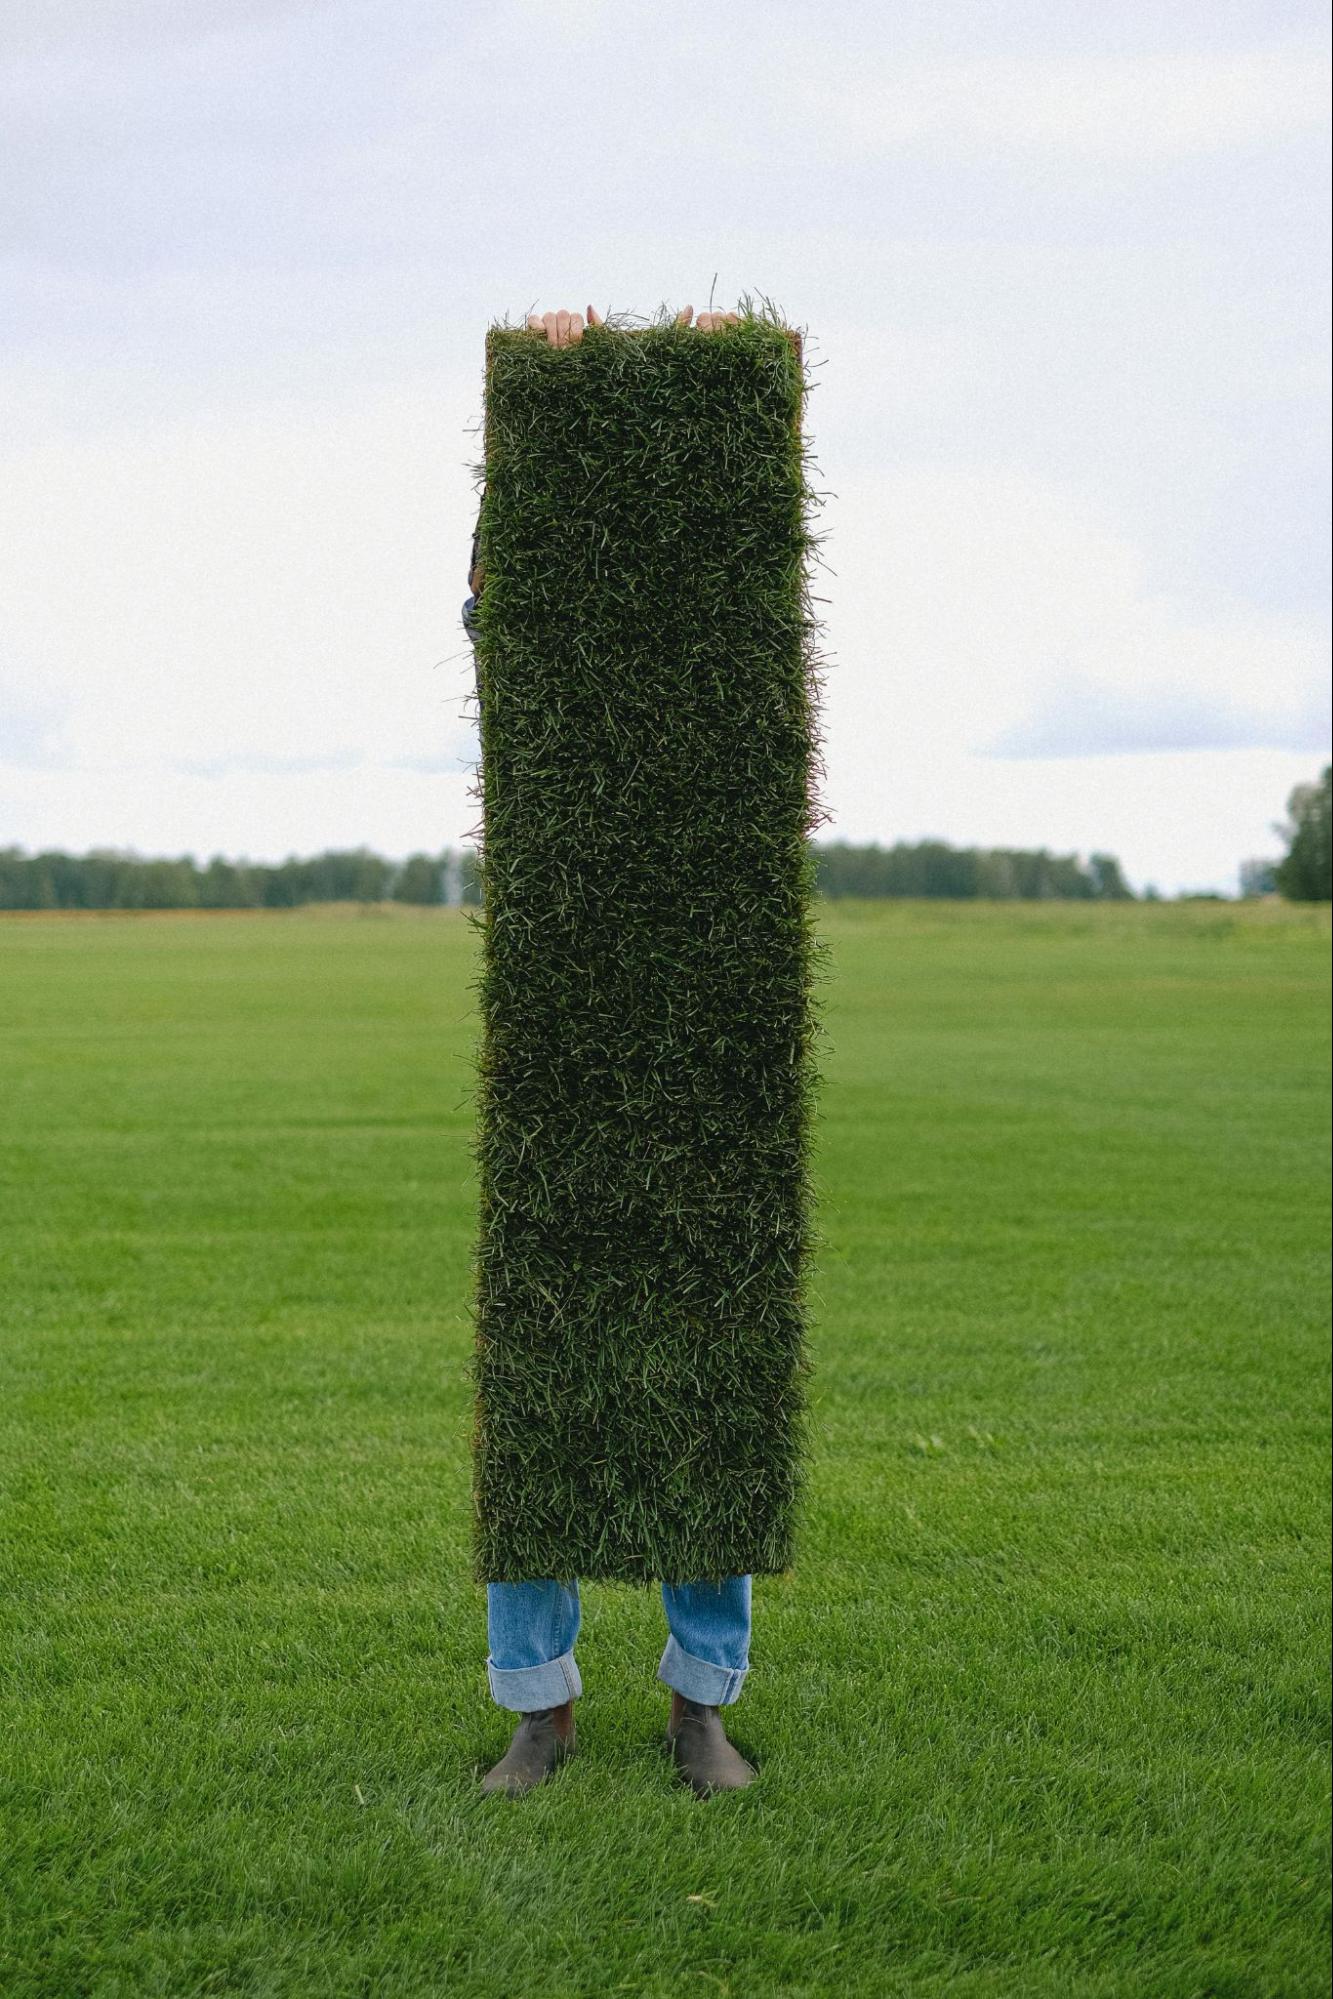 Person Holding a Cut of Grass